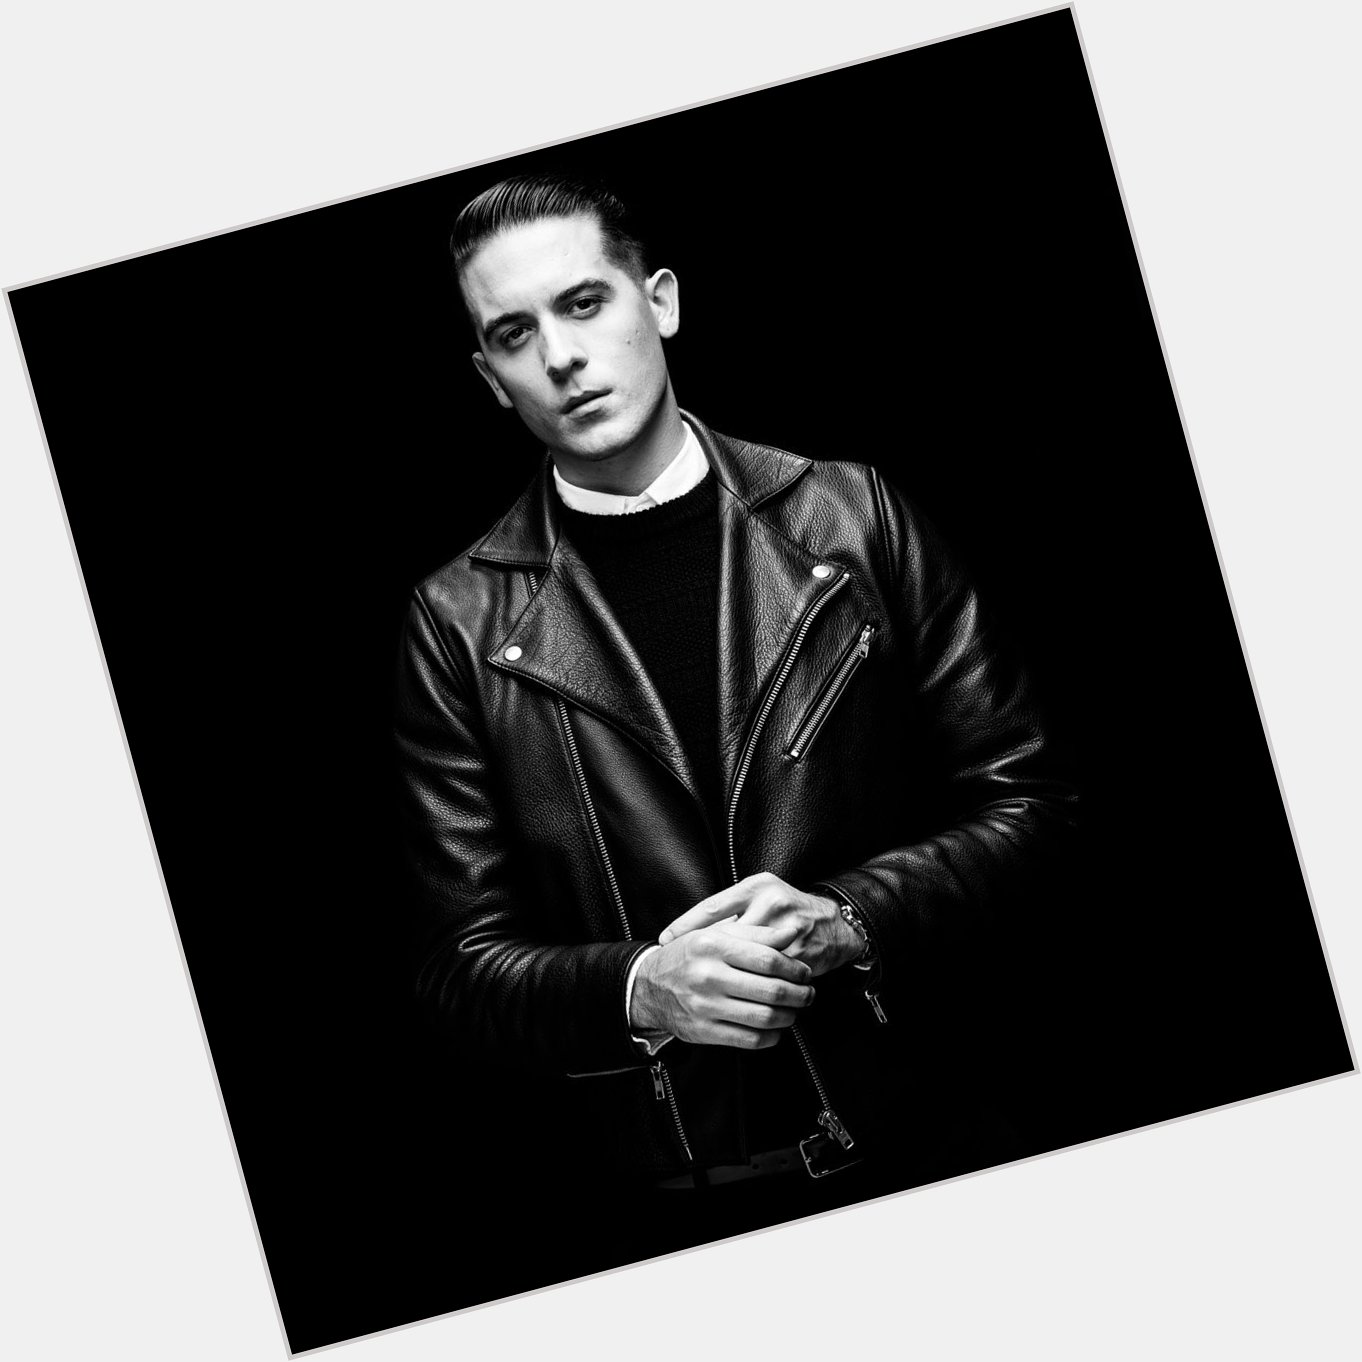 Happy 33rd Birthday to my Oakland homie & brother Happy 33rd Birthday G-Eazy 